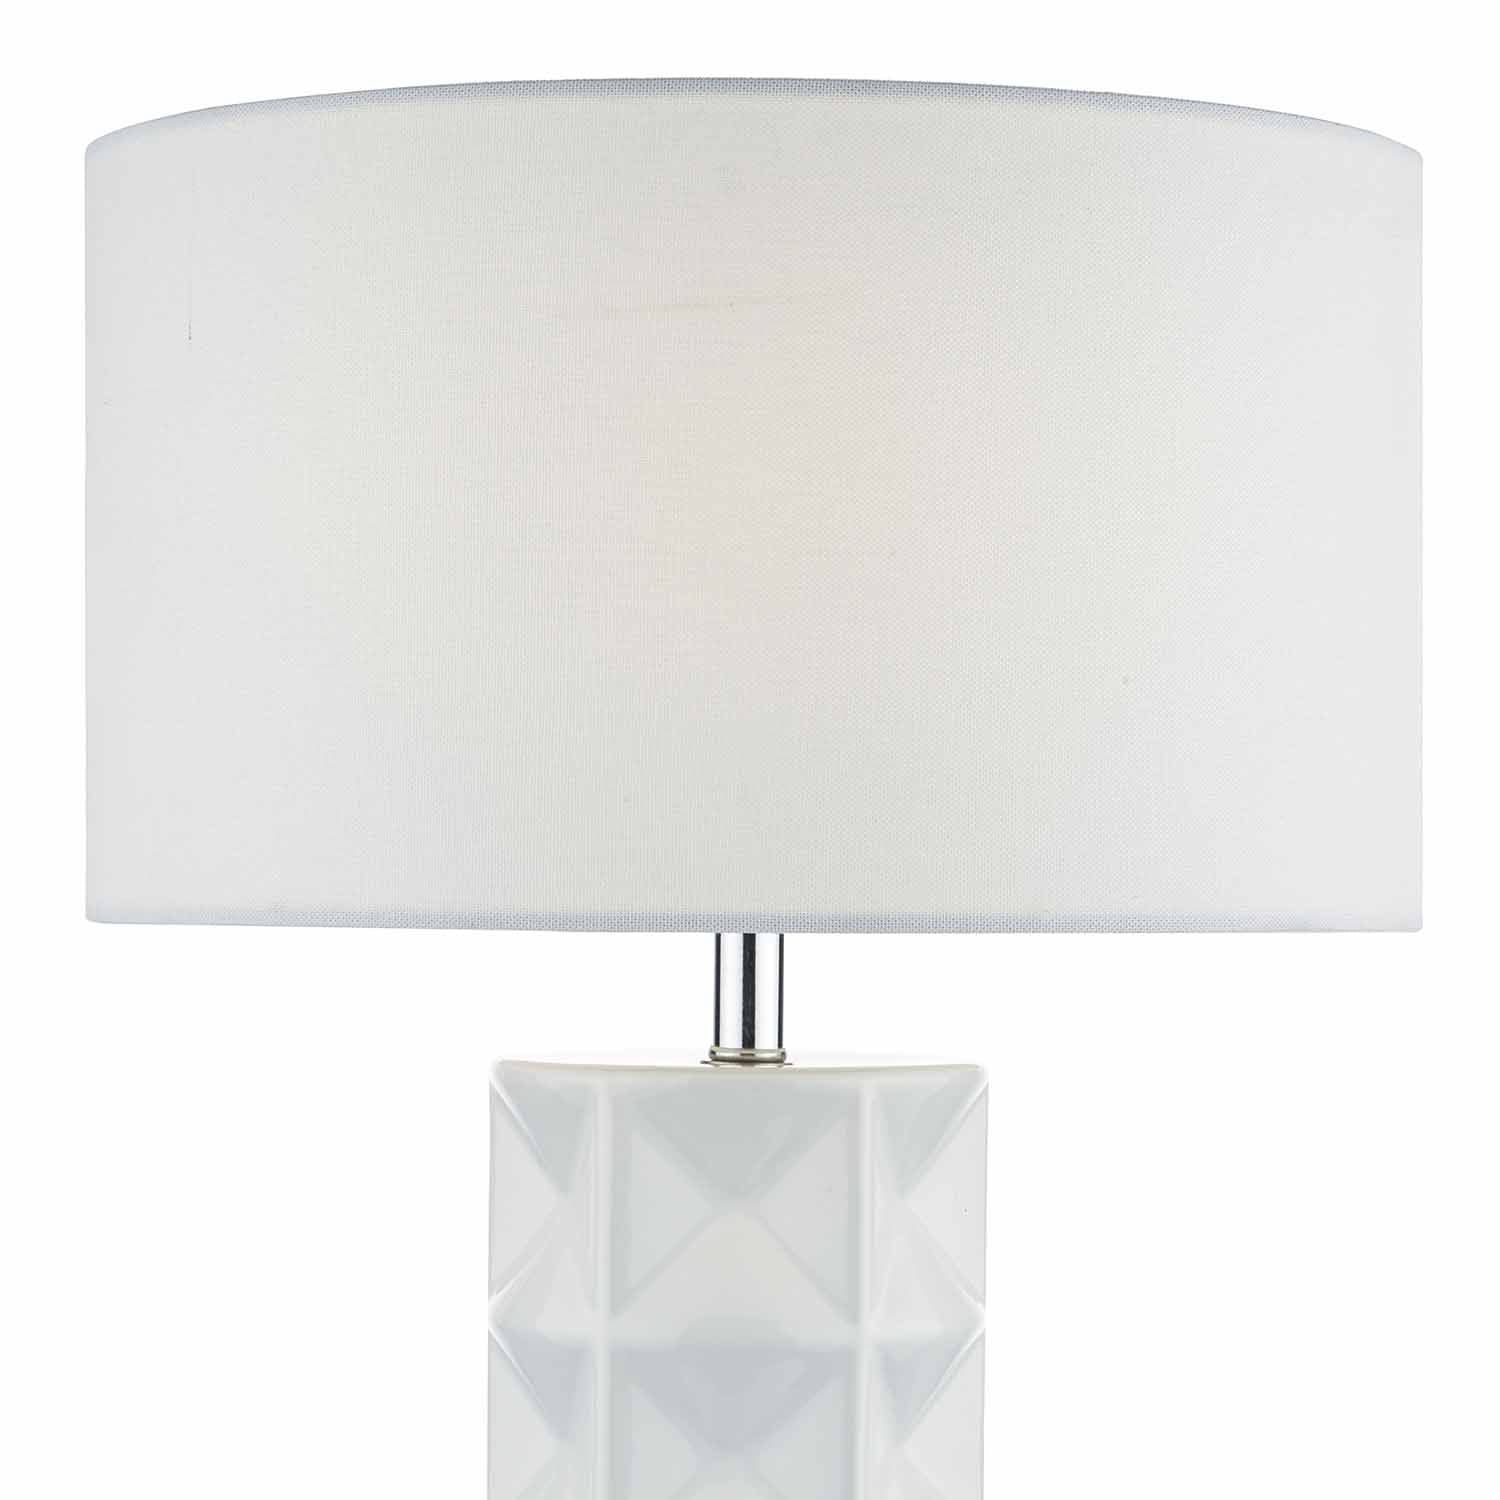 Gift Table Lamp 3D Pattern White With Shade